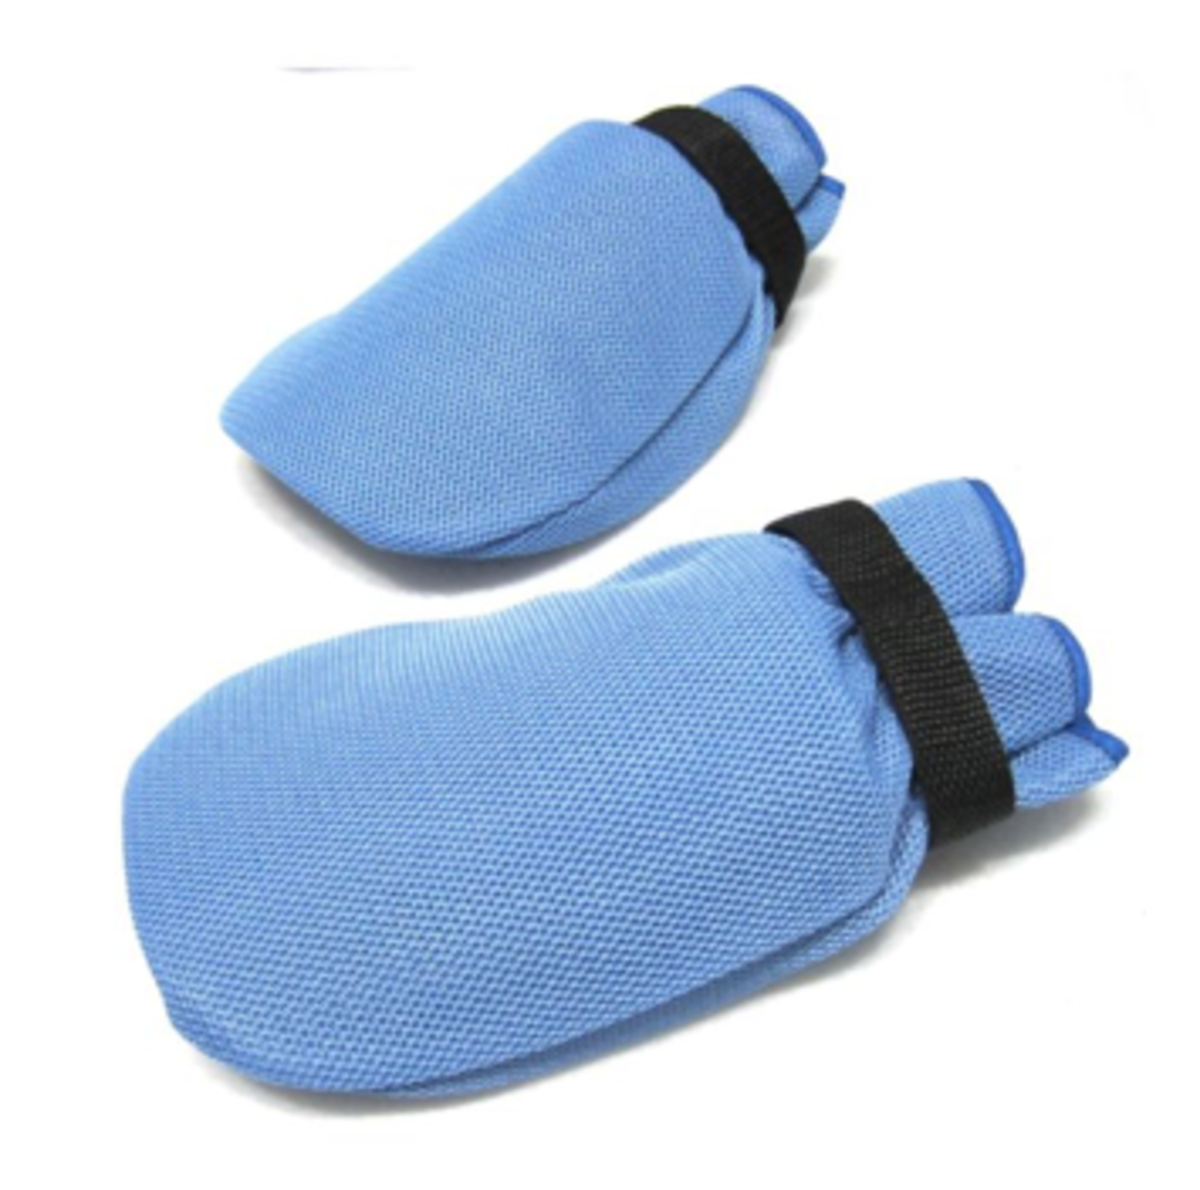 Air Mesh Padded Mitts